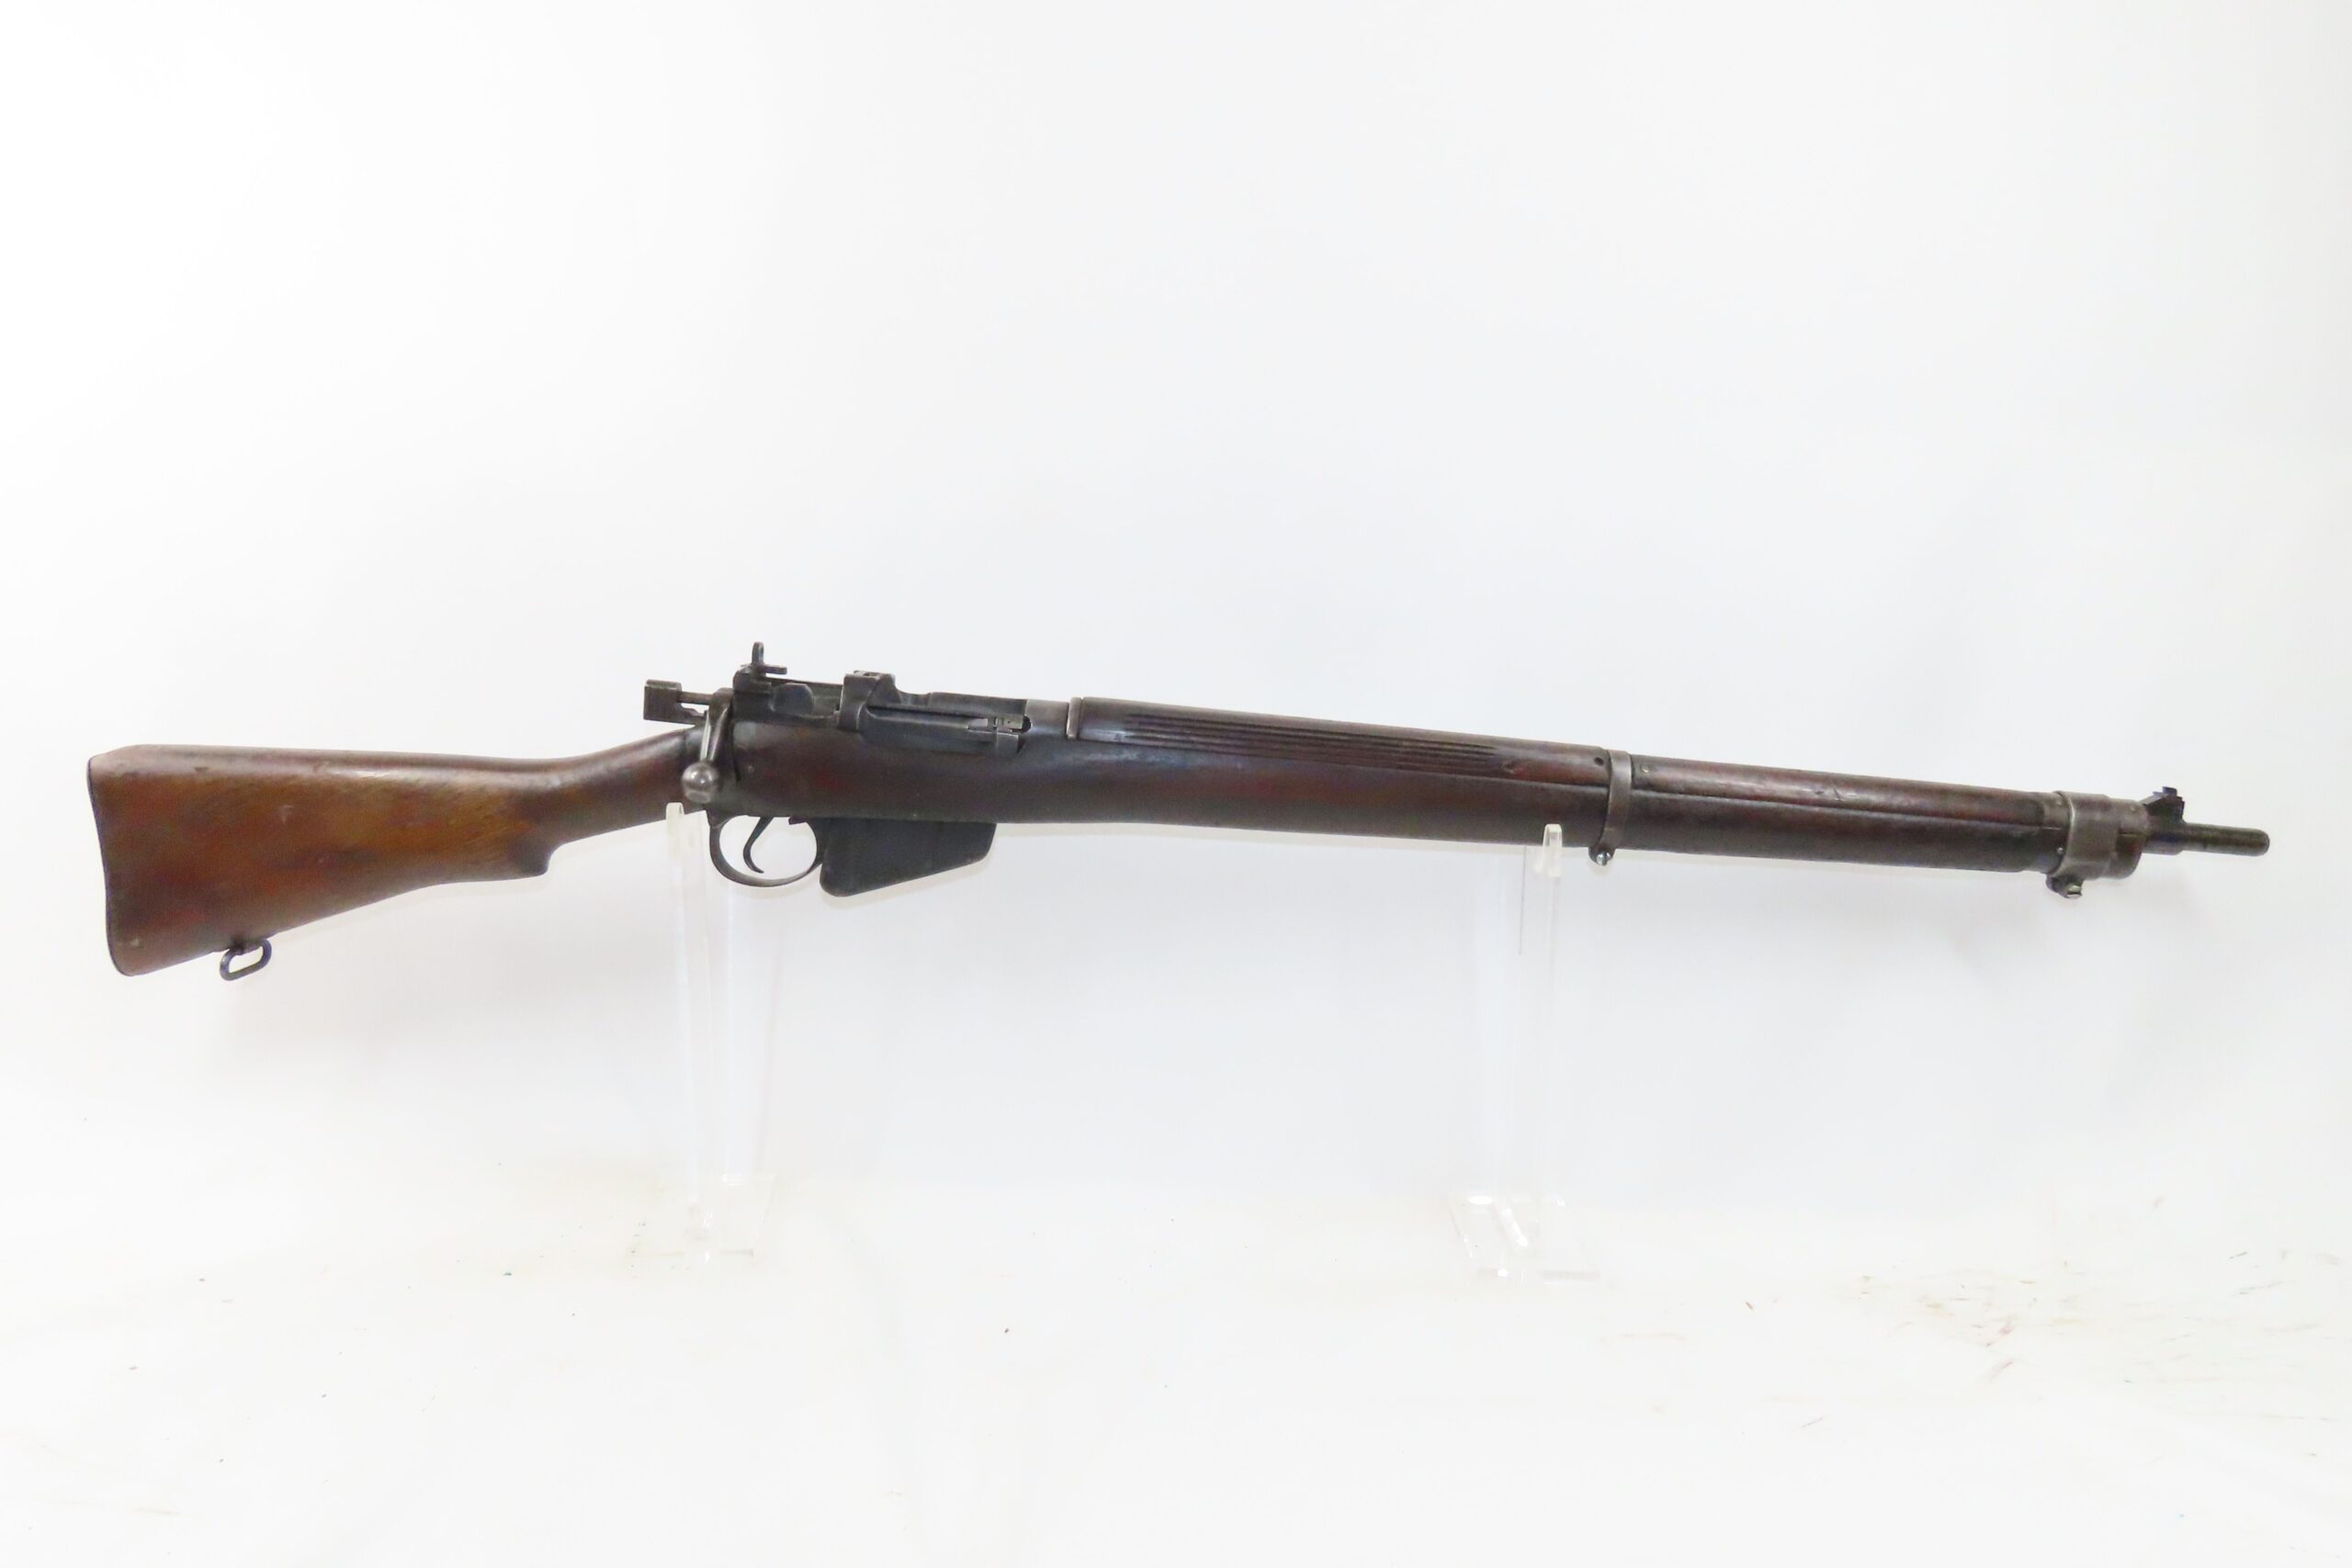 WORLD WAR II Era LONG BRANCH Enfield No. 4 Mk1* C&R British MILITARY Rifle  Primary INFANTRY Weapon of ENGLAND & CANADA